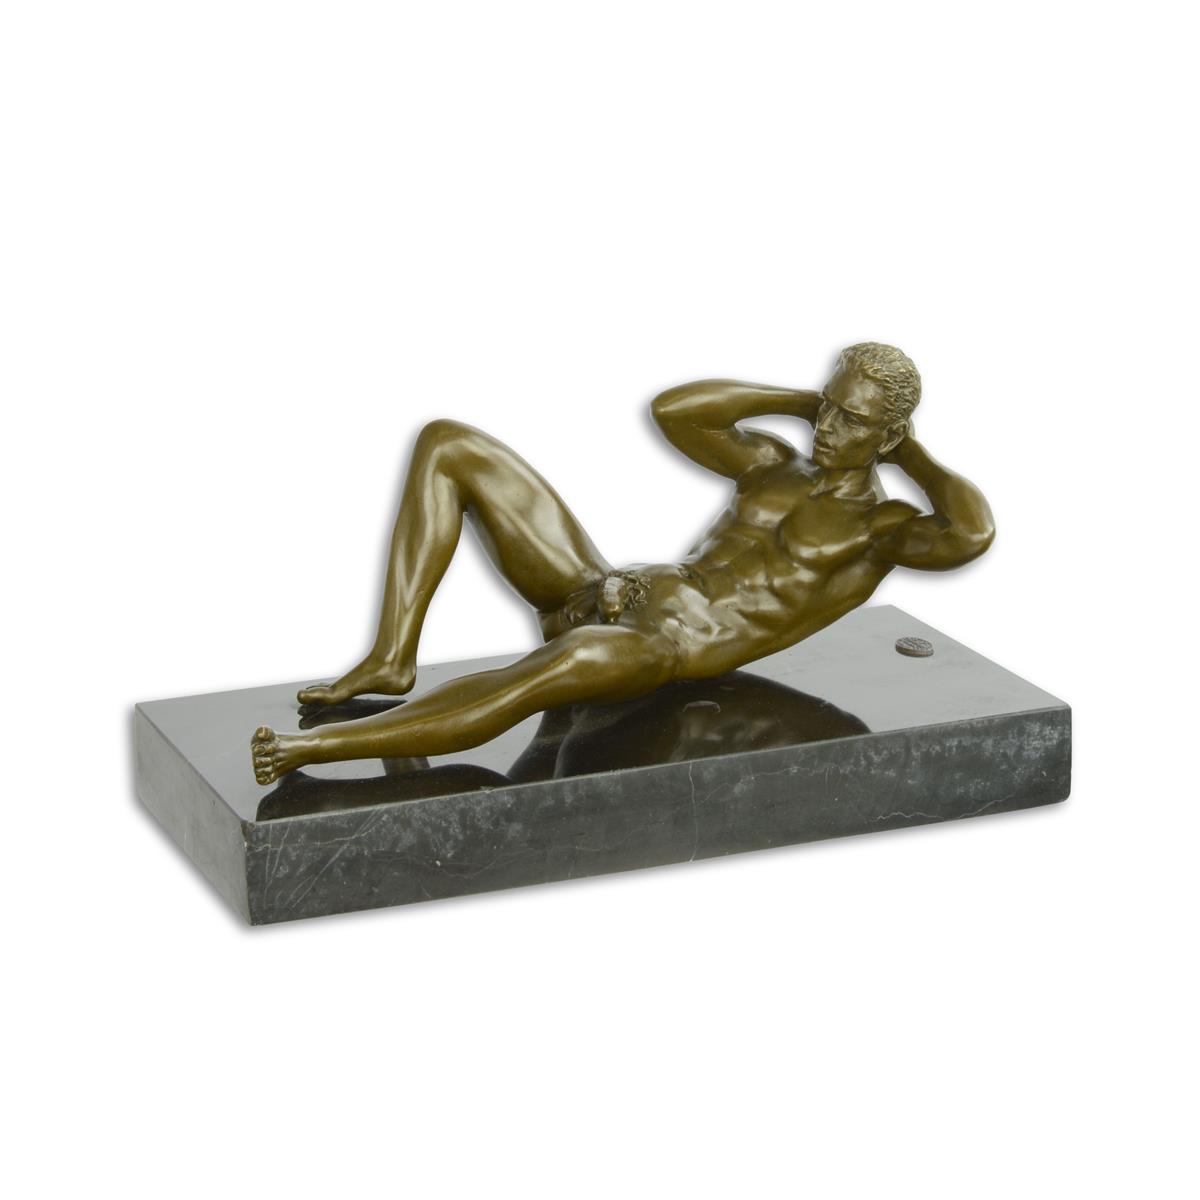 AN EROTIC BRONZE SCULPTURE OF A RECLINING MALE NUDE